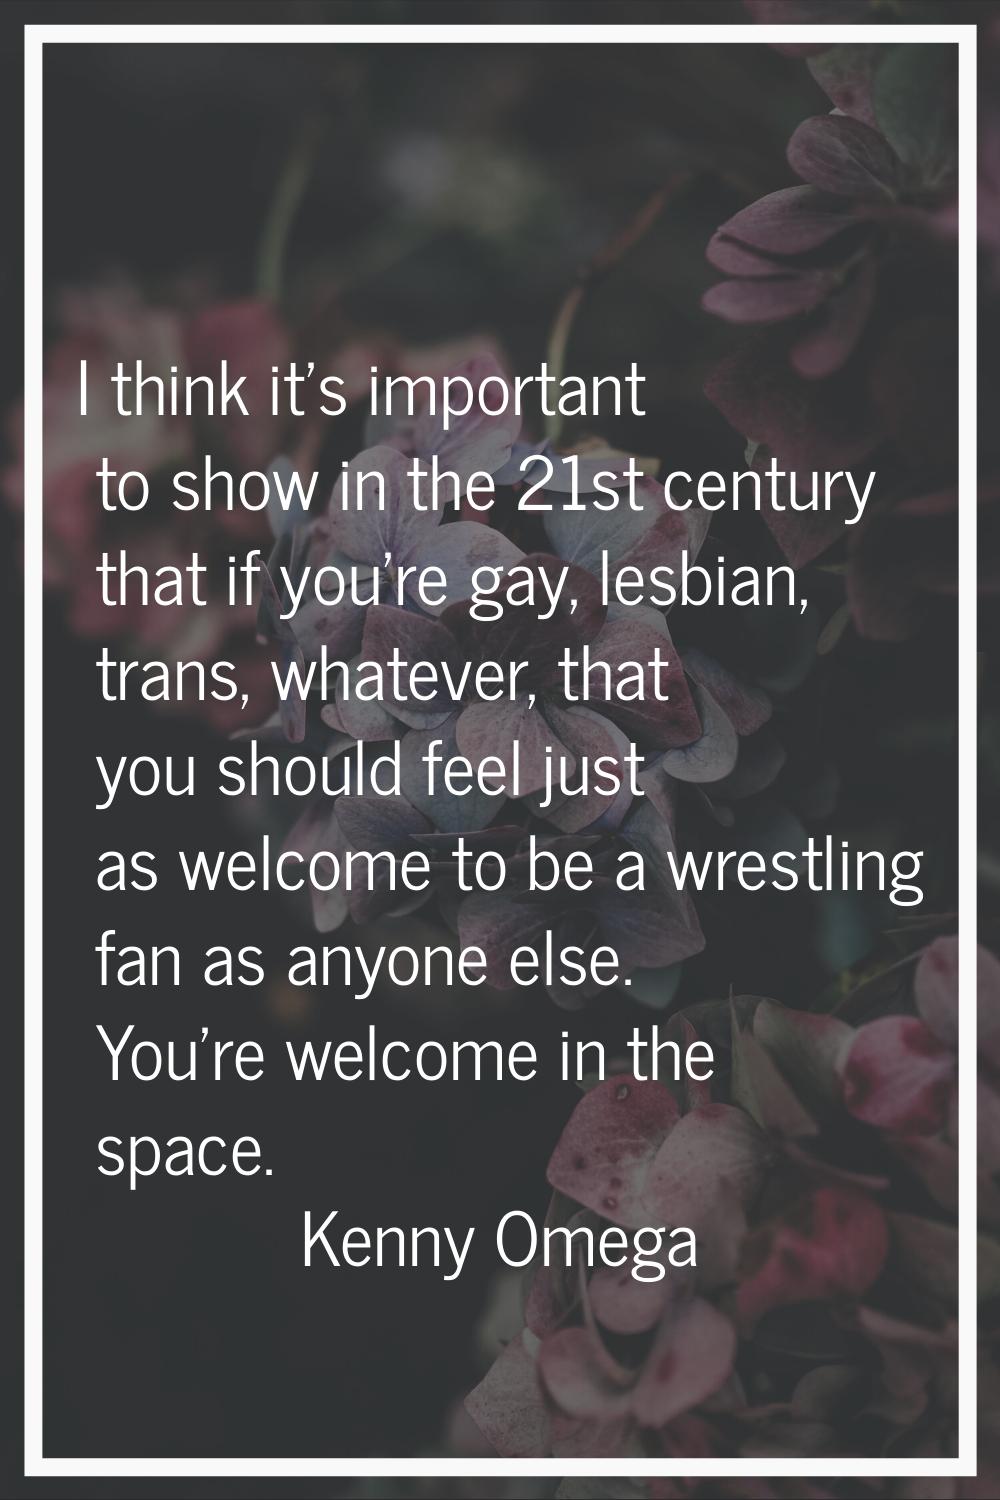 I think it's important to show in the 21st century that if you're gay, lesbian, trans, whatever, th